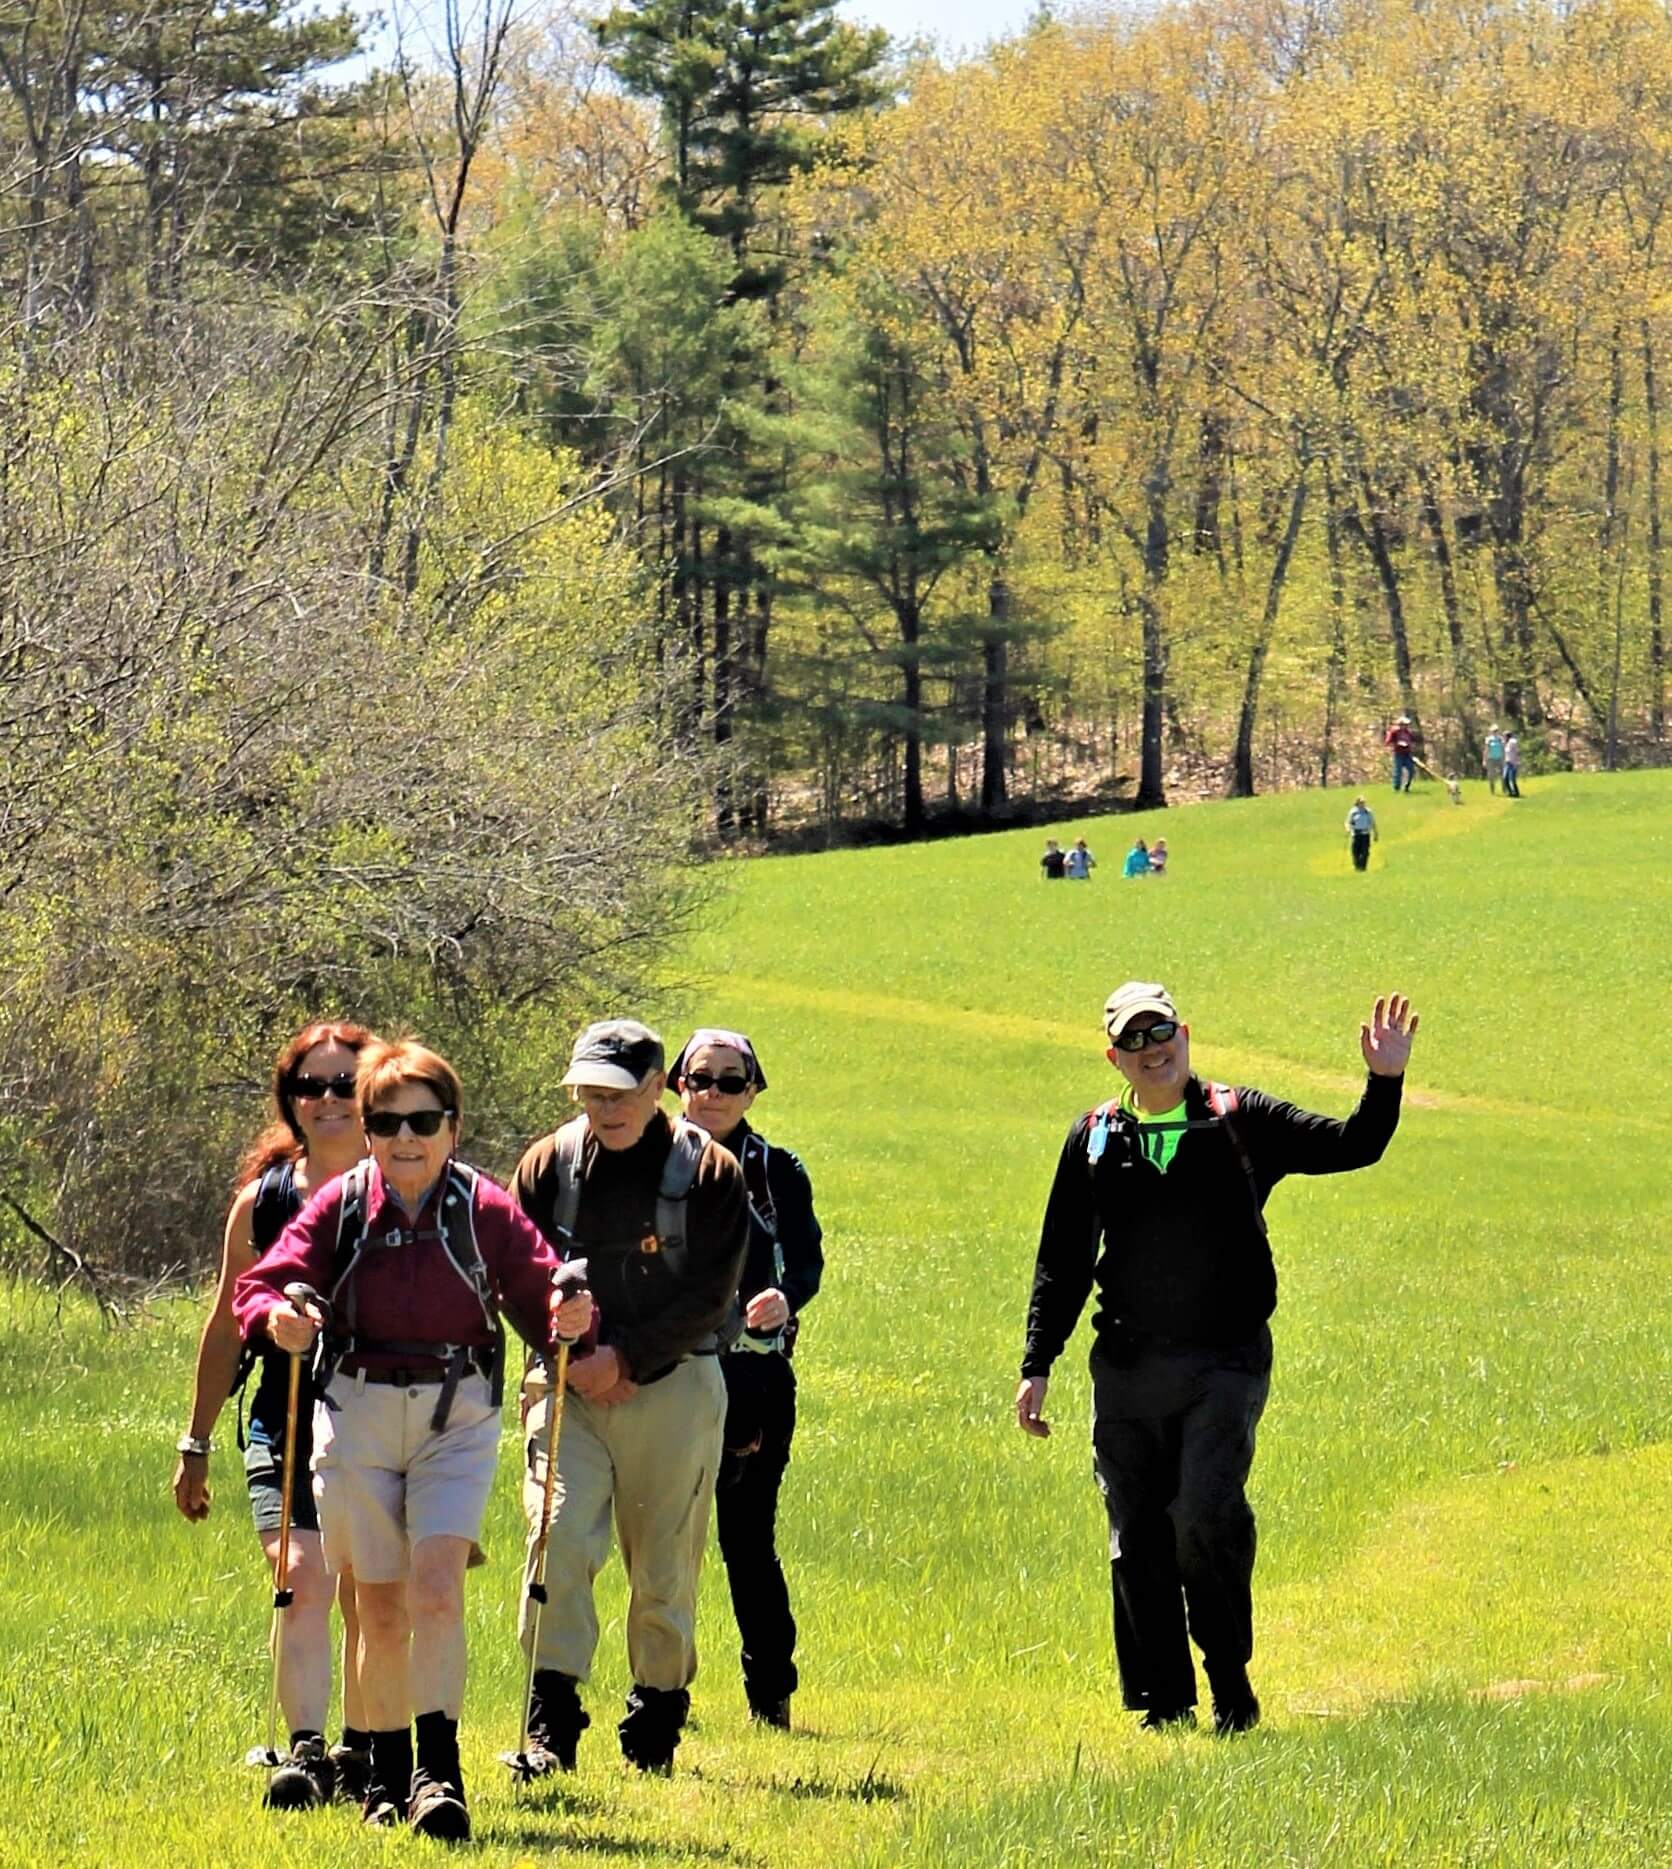 Hikers on the Viall's Crossing Trail. (Credit: CATS)